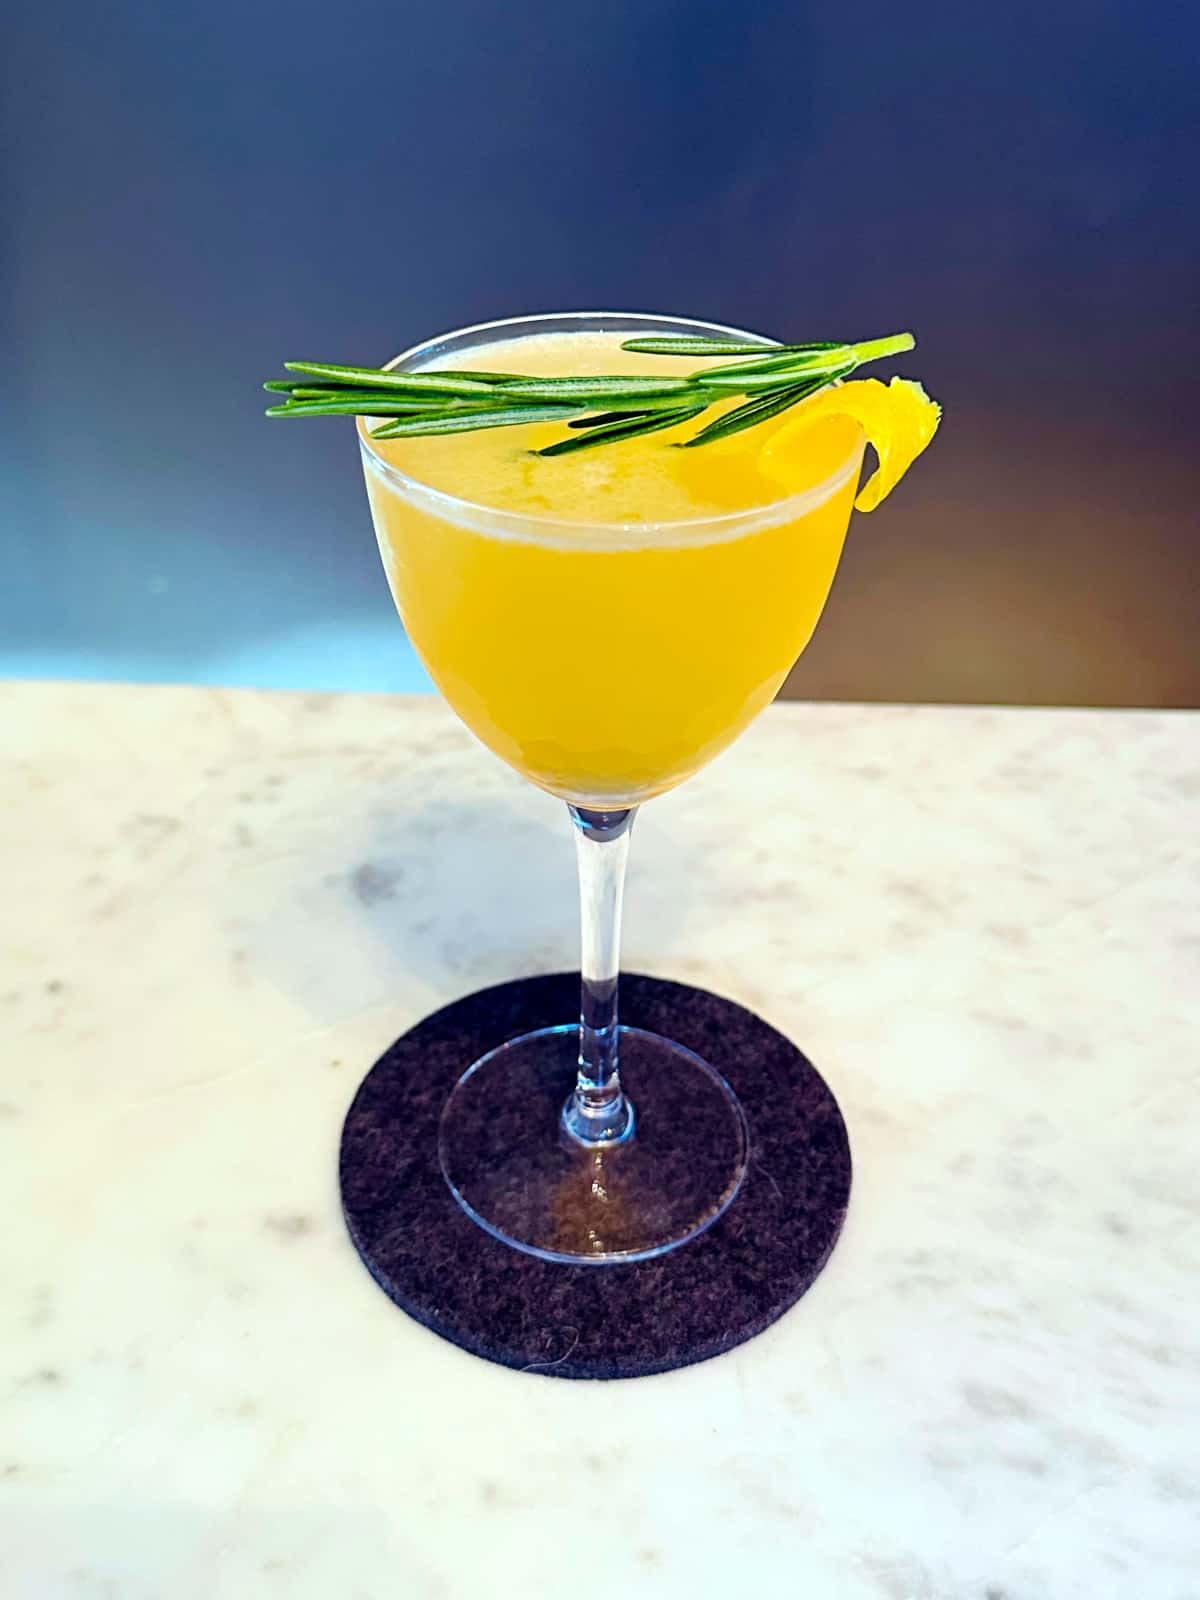 Rosemary lemon drop cocktail in a coupe glass with a sprig of fresh rosemary and a lemon twist.